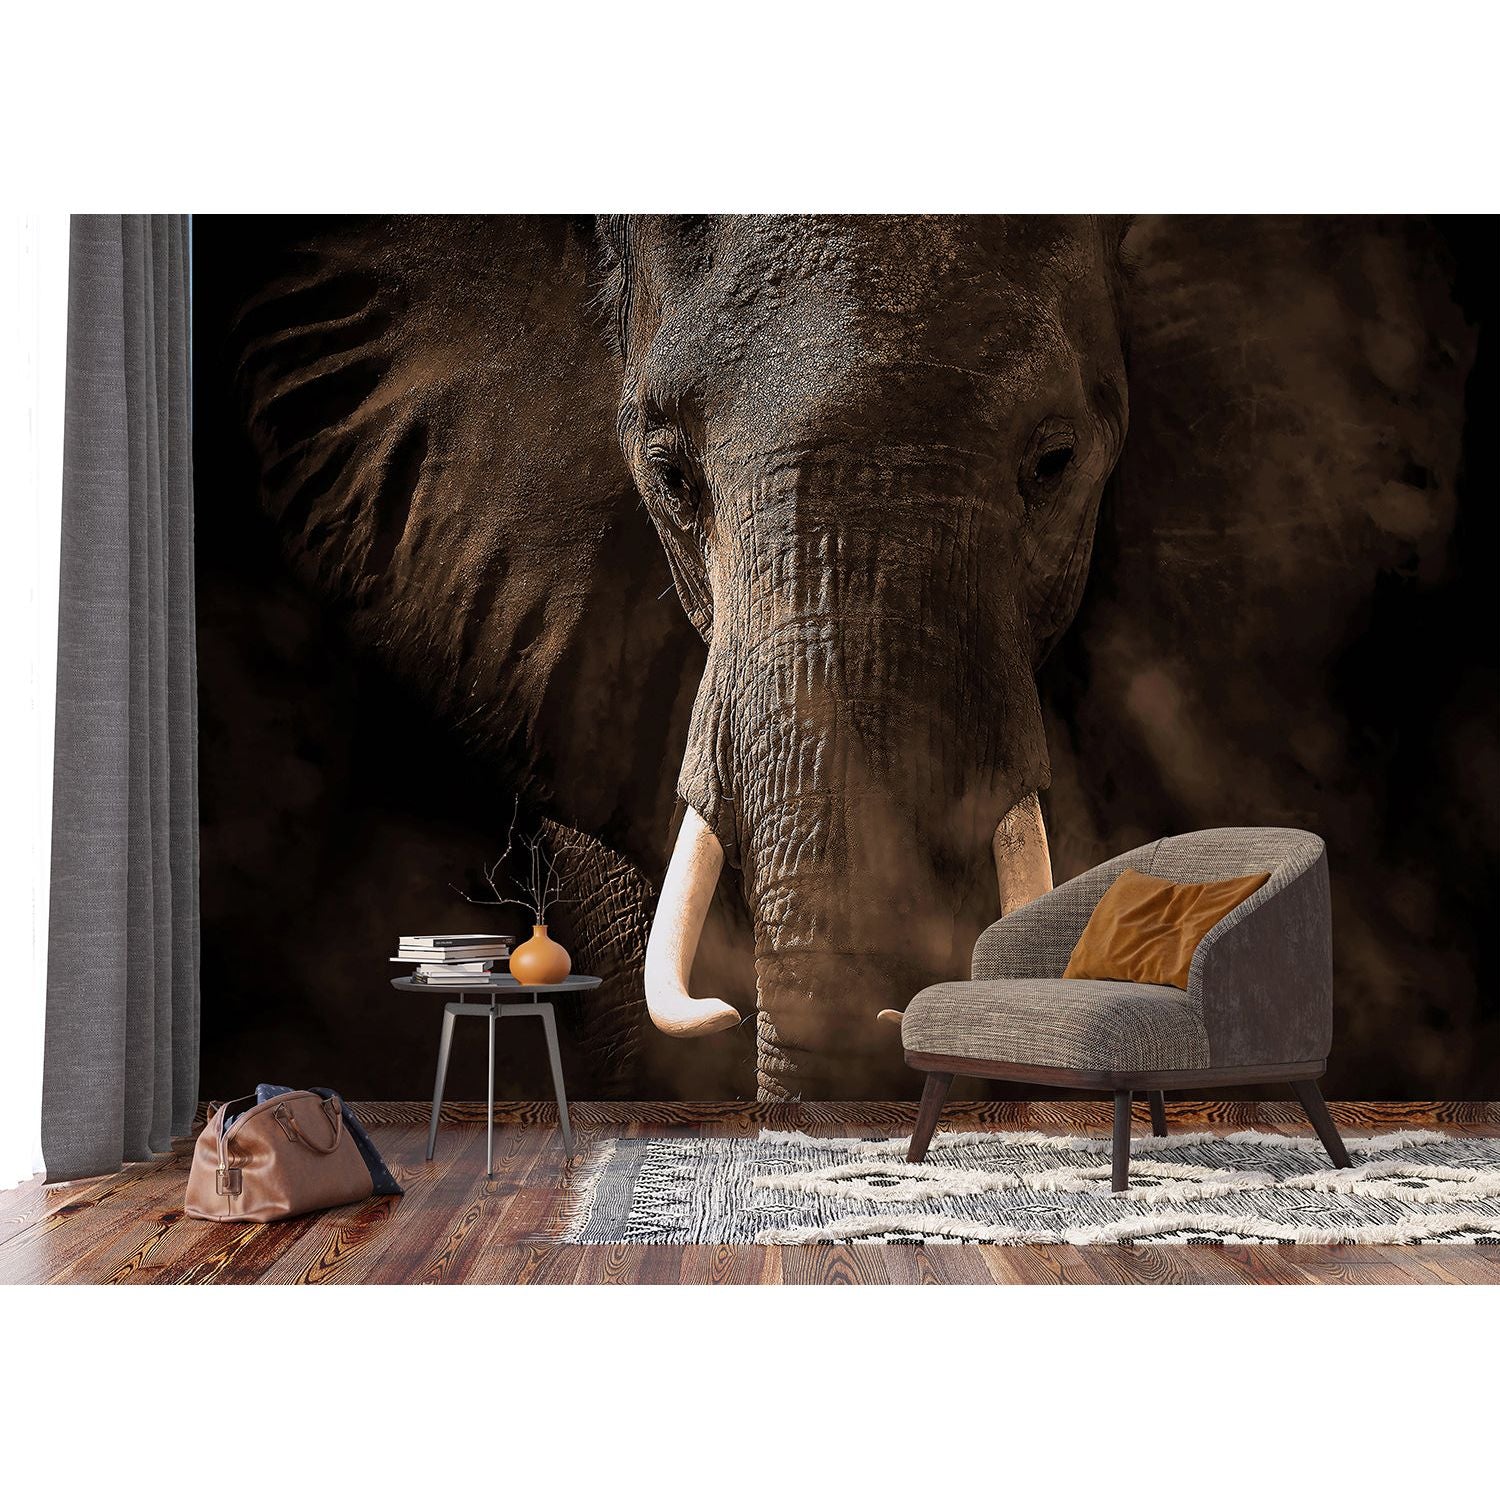 Essence of the Elephant Wall Mural